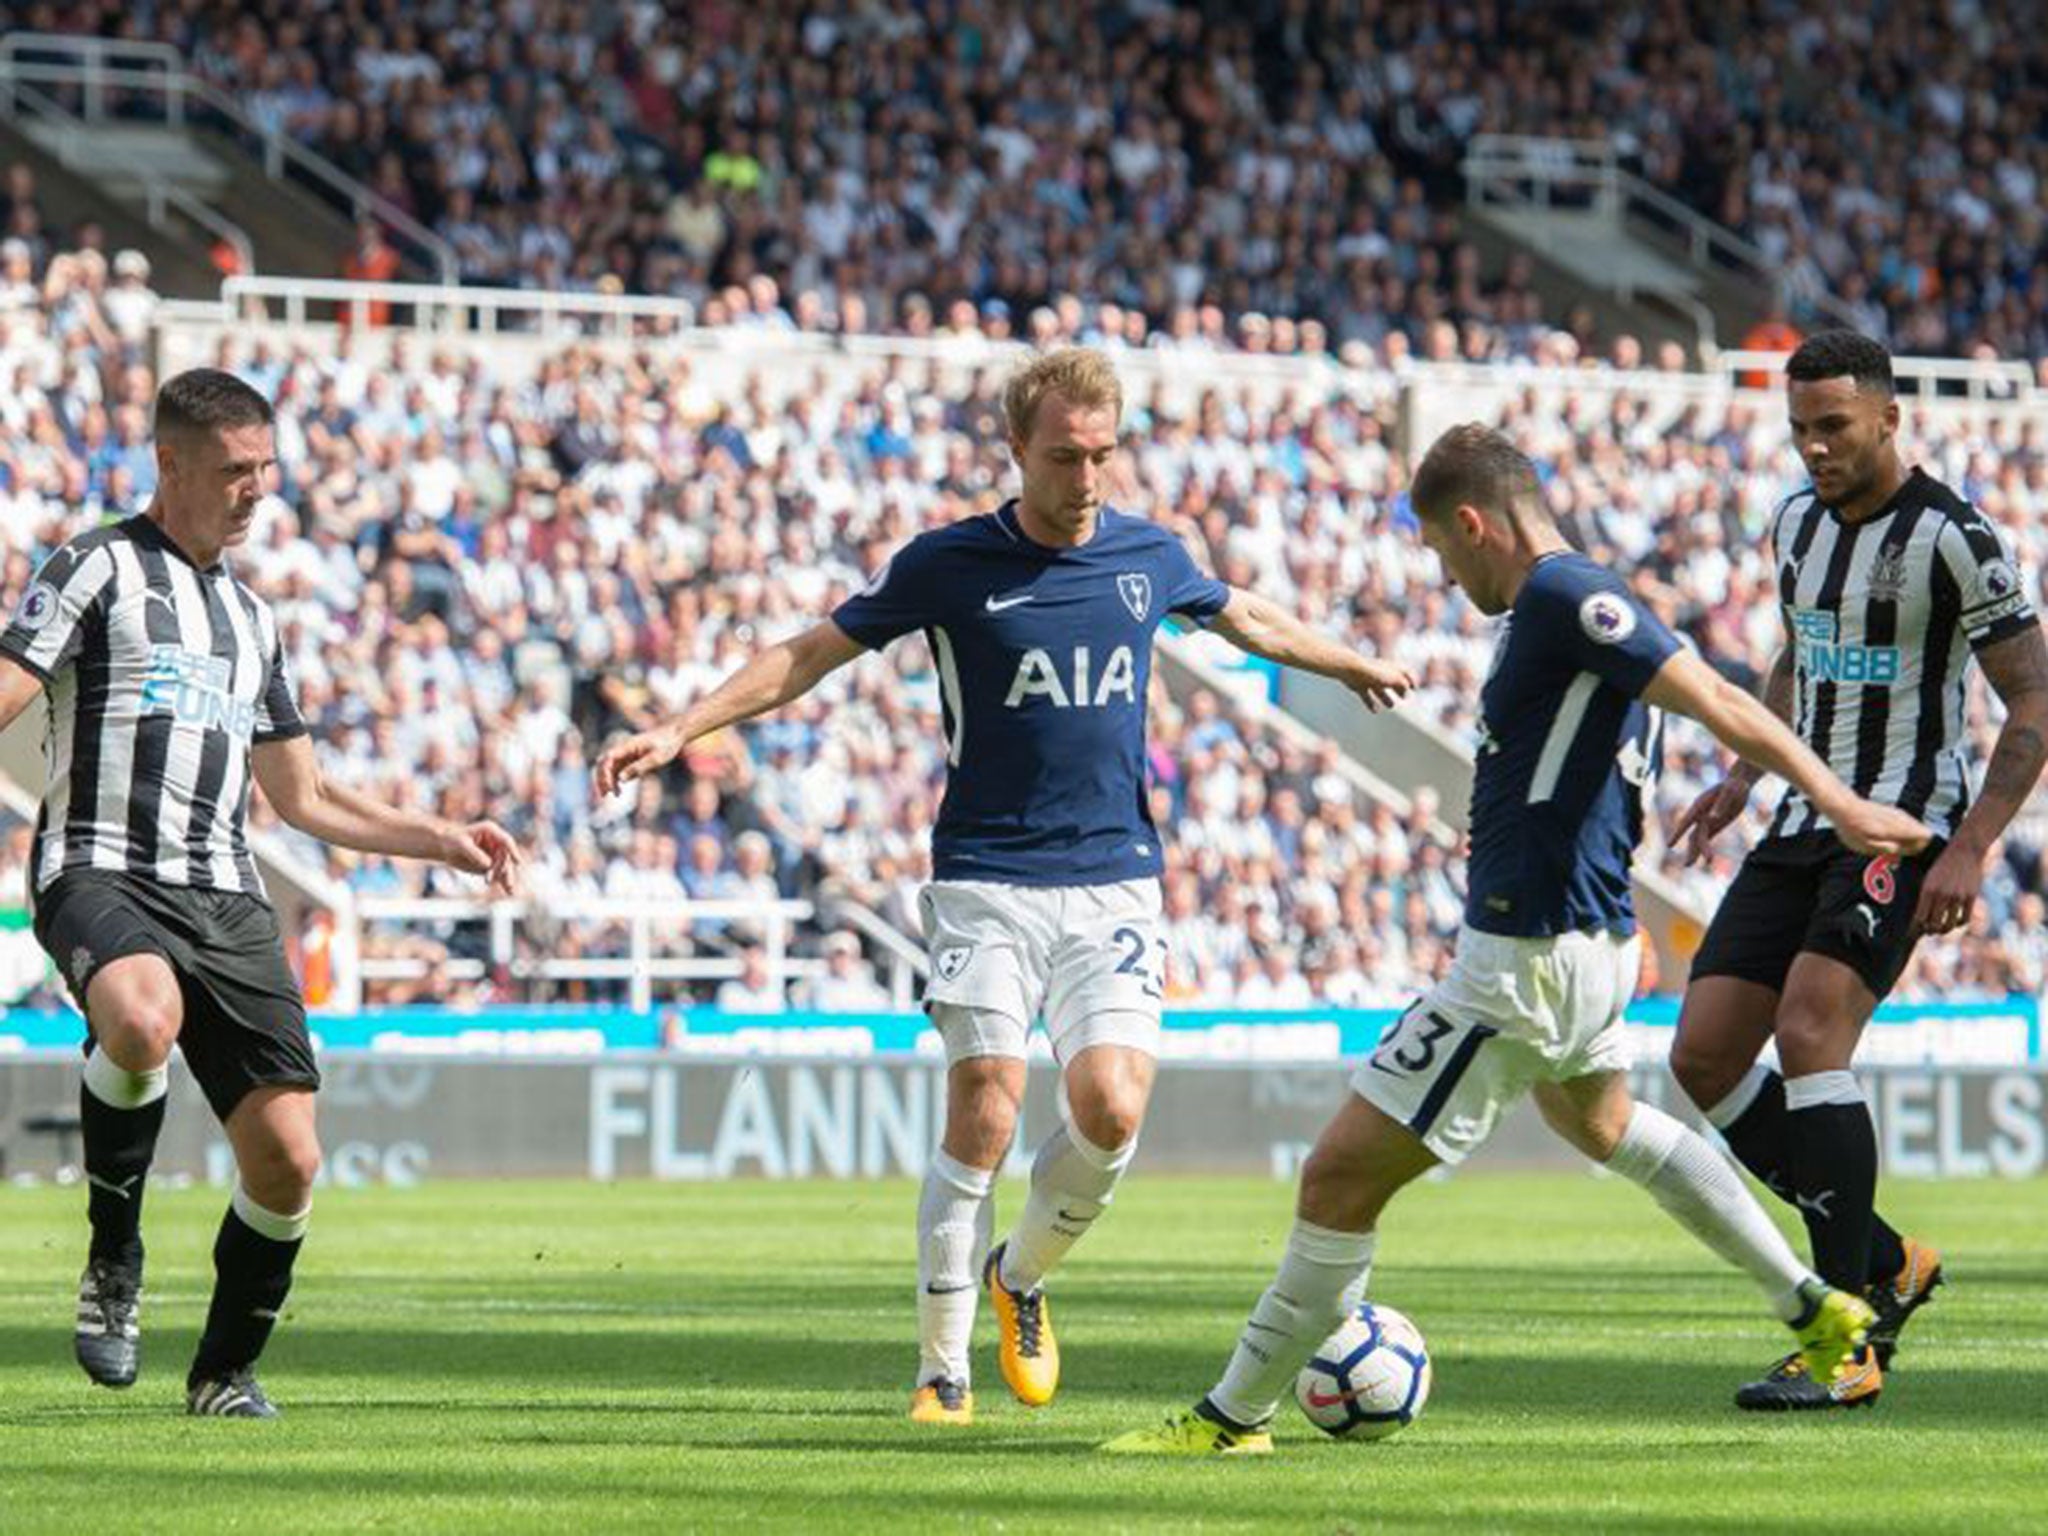 Ben Davies struck home the second to finish a flowing move by Spurs